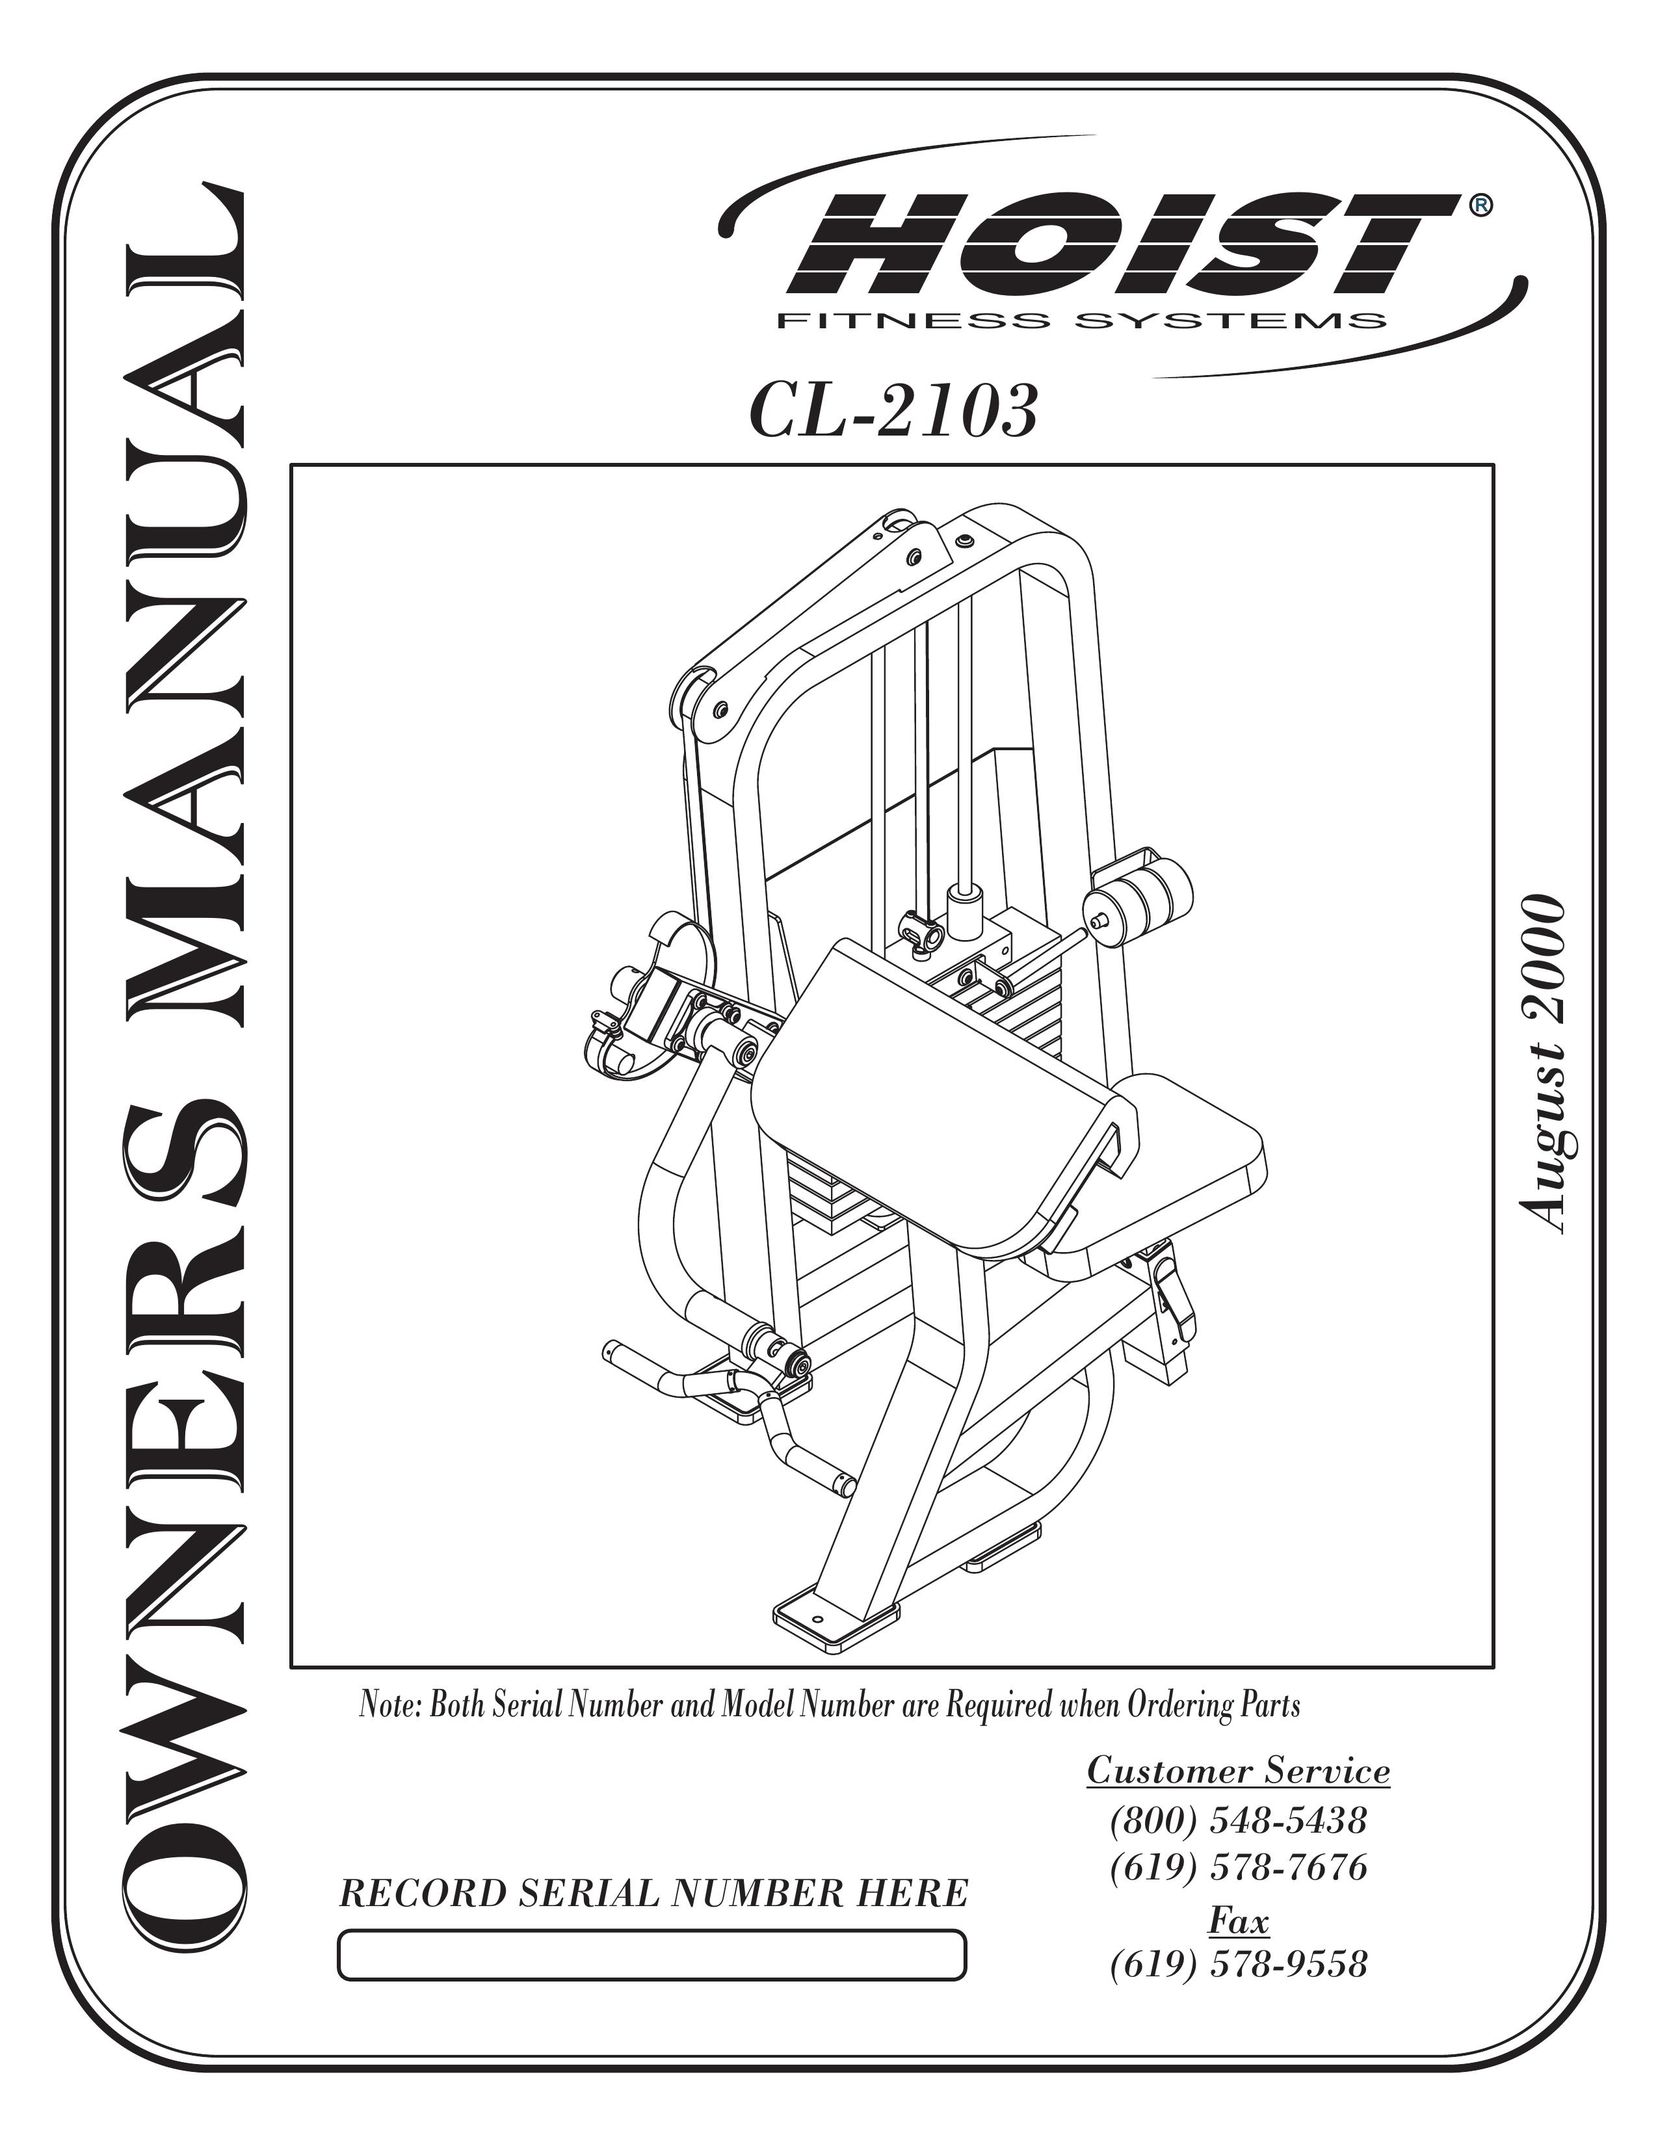 Hoist Fitness CL-2103 Rowing Machine User Manual